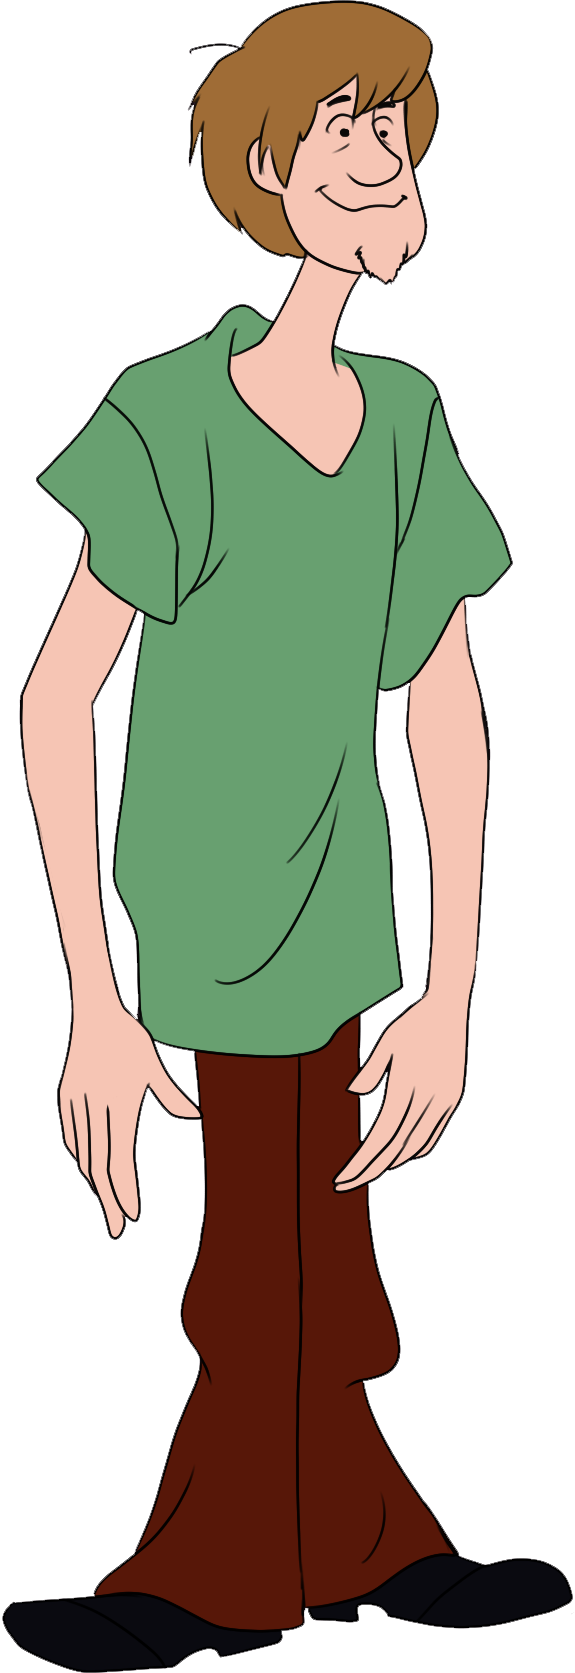 Shaggy Rogers Background Image PNG